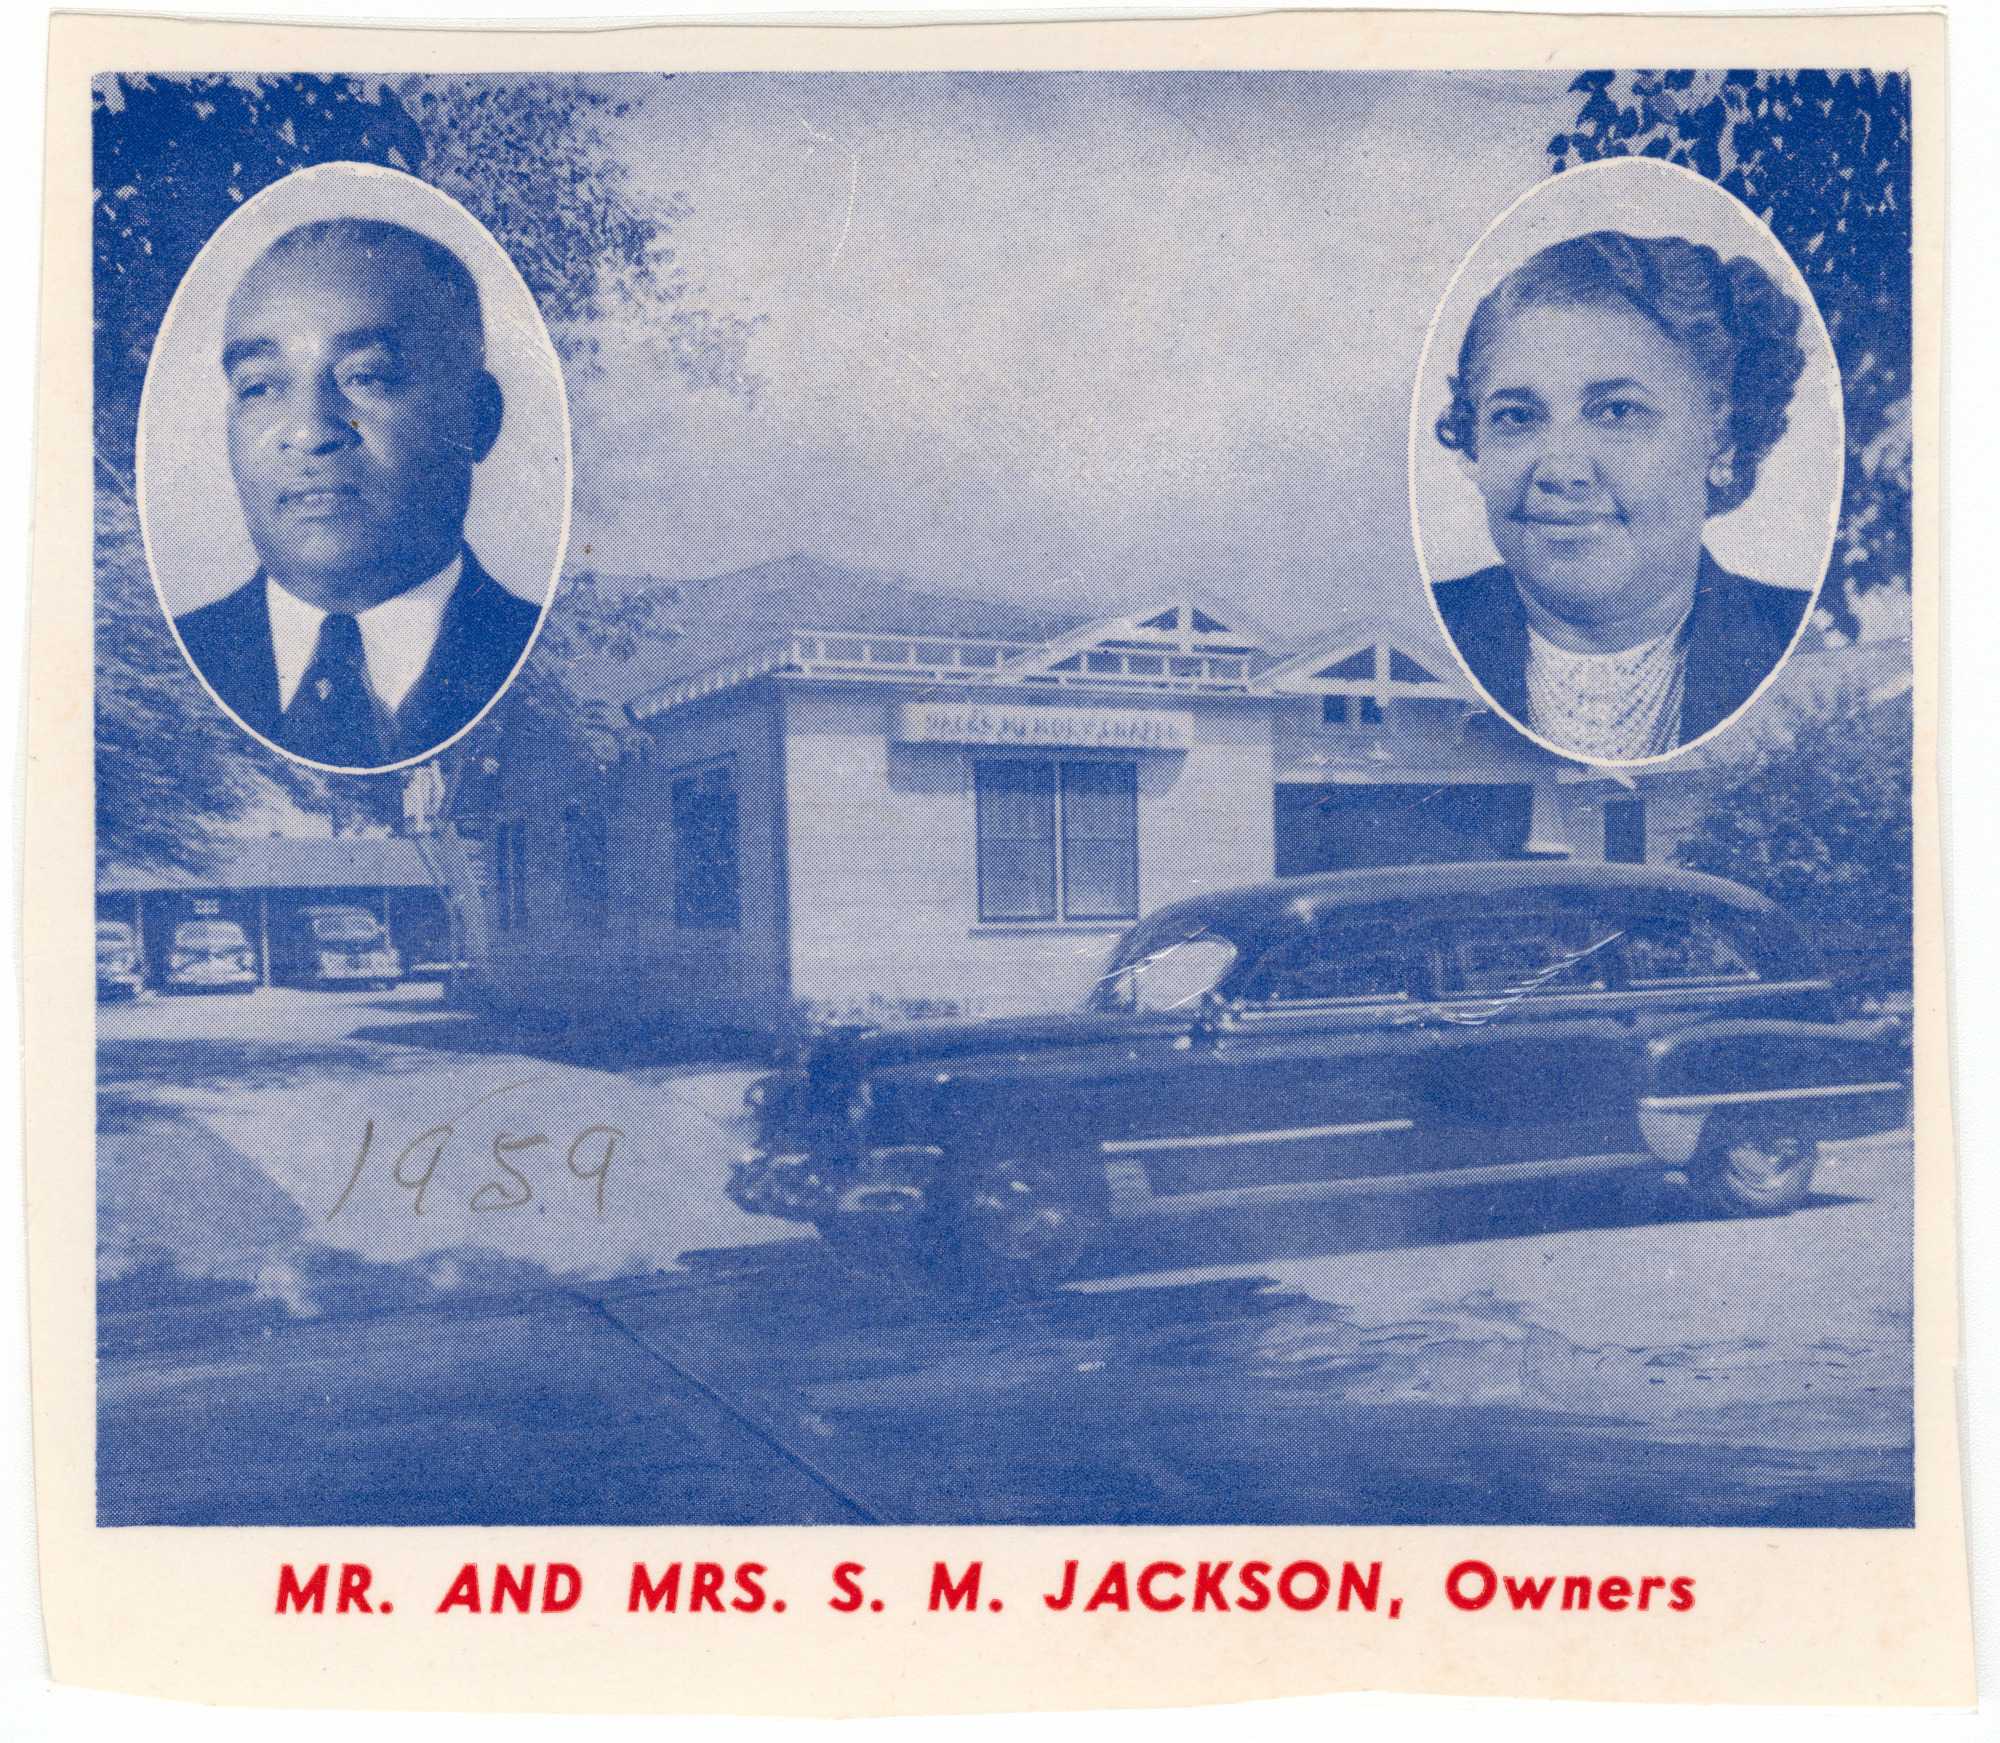 A photomechanical print advertisement for Mr. and Mrs. S.M. Jackson’s funeral home business.